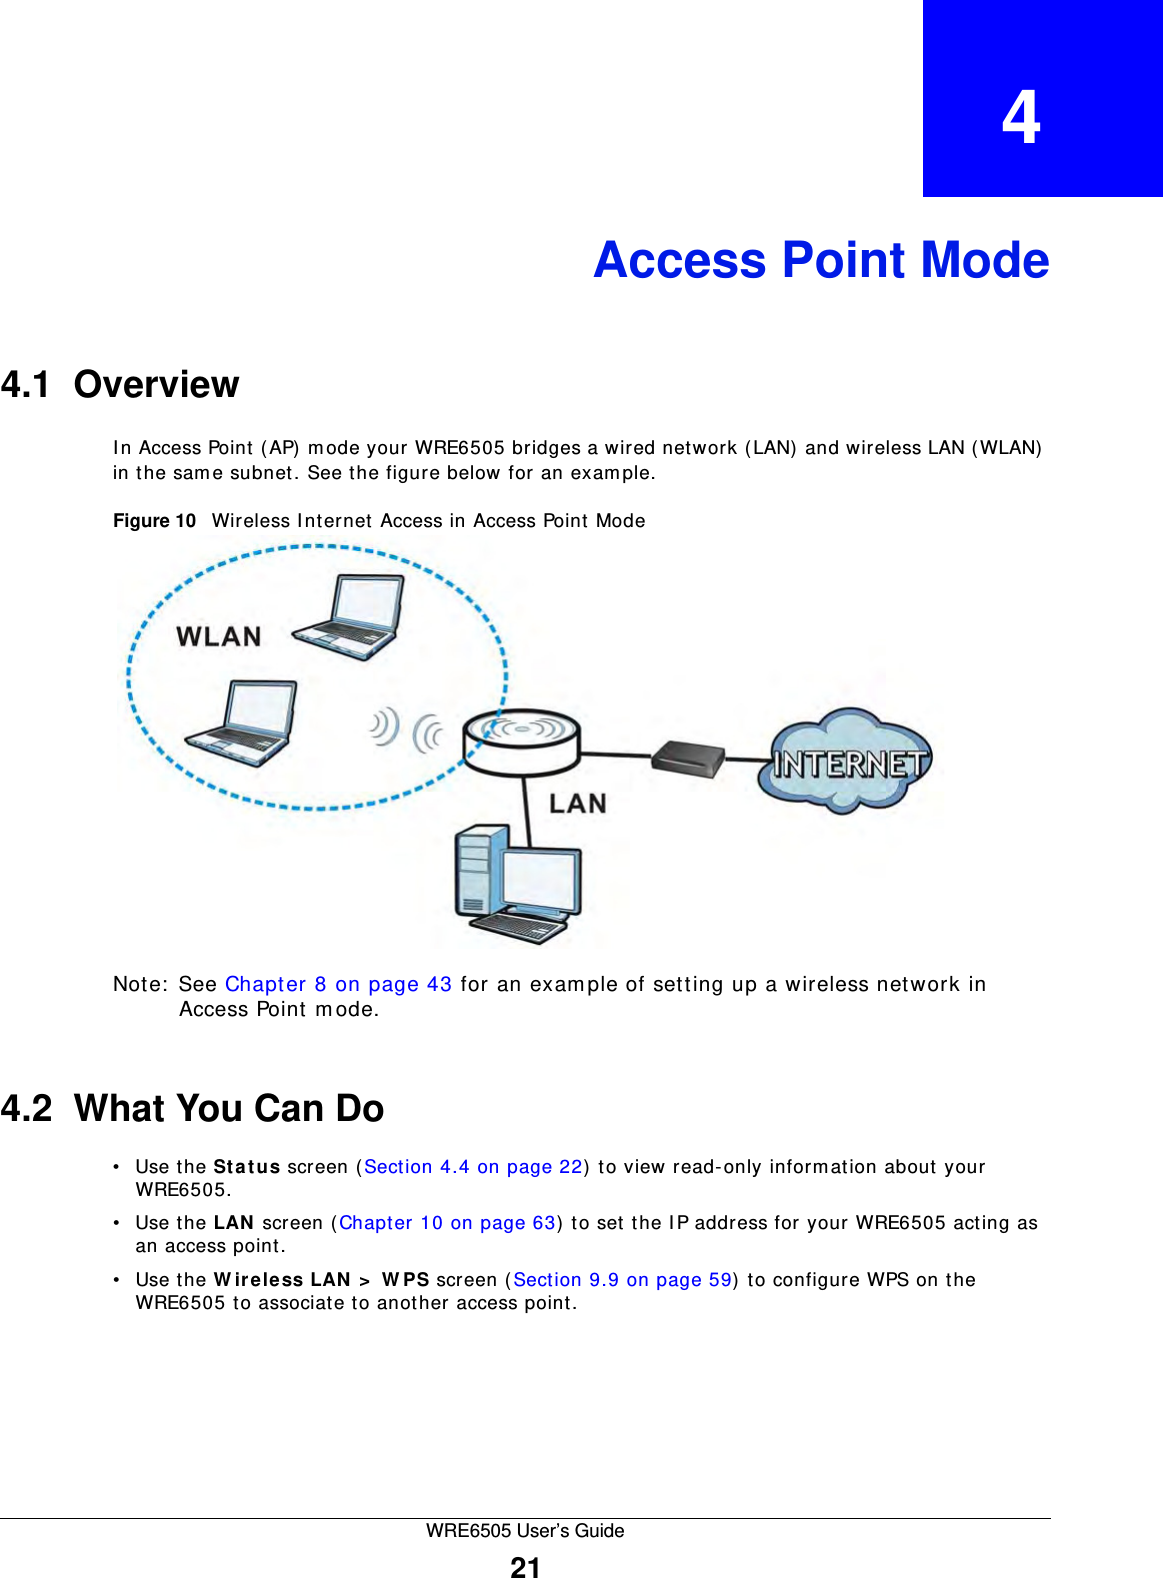 WRE6505 User’s Guide21CHAPTER   4Access Point Mode4.1  OverviewIn Access Point ( AP) m ode your WRE6505 bridges a wired network (LAN) and wireless LAN ( WLAN) in the sam e subnet. See the figure below for an exam ple.Figure 10   Wireless Internet Access in Access Point Mode Note:  See Chapter 8 on page 43 for an example of setting up a wireless network in Access Point m ode. 4.2  What You Can Do• Use the St a t u s screen (Section 4.4 on page 22) to view read-only inform ation about your WRE6505.• Use the LAN  screen (Chapter 10 on page 63) to set the I P address for your WRE6505 acting as an access point.• Use the W ire le ss LAN  &gt;  W PS screen (Section 9.9 on page 59) to configure WPS on the WRE6505 to associate to another access point. 